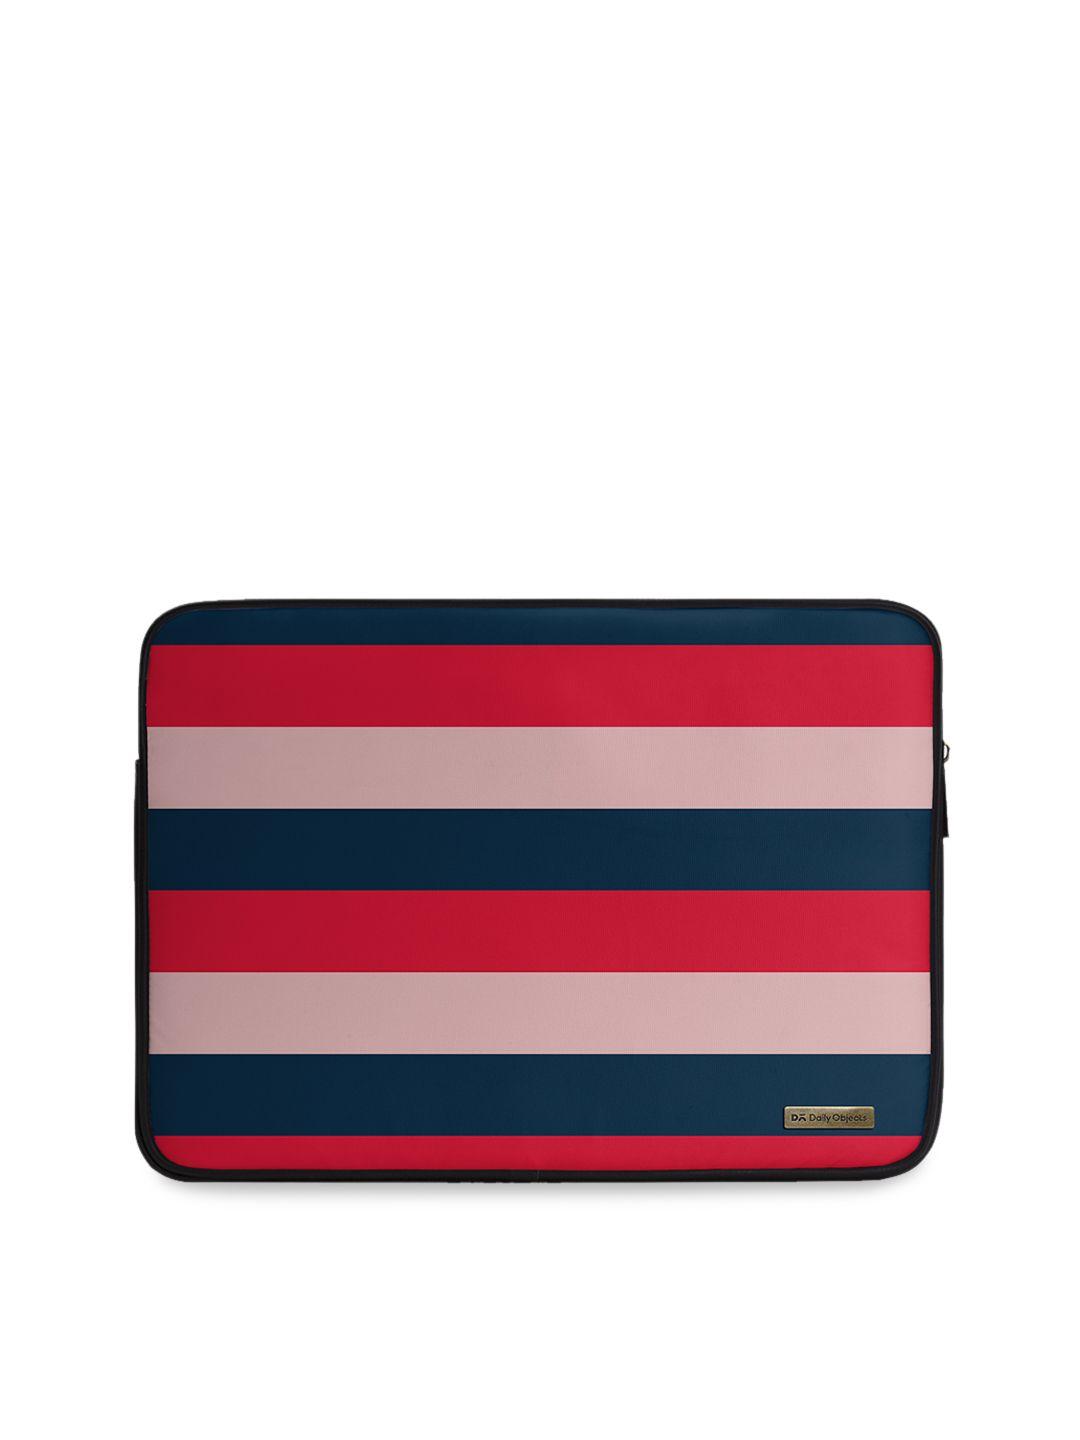 dailyobjects unisex red & navy blue printed laptop sleeve